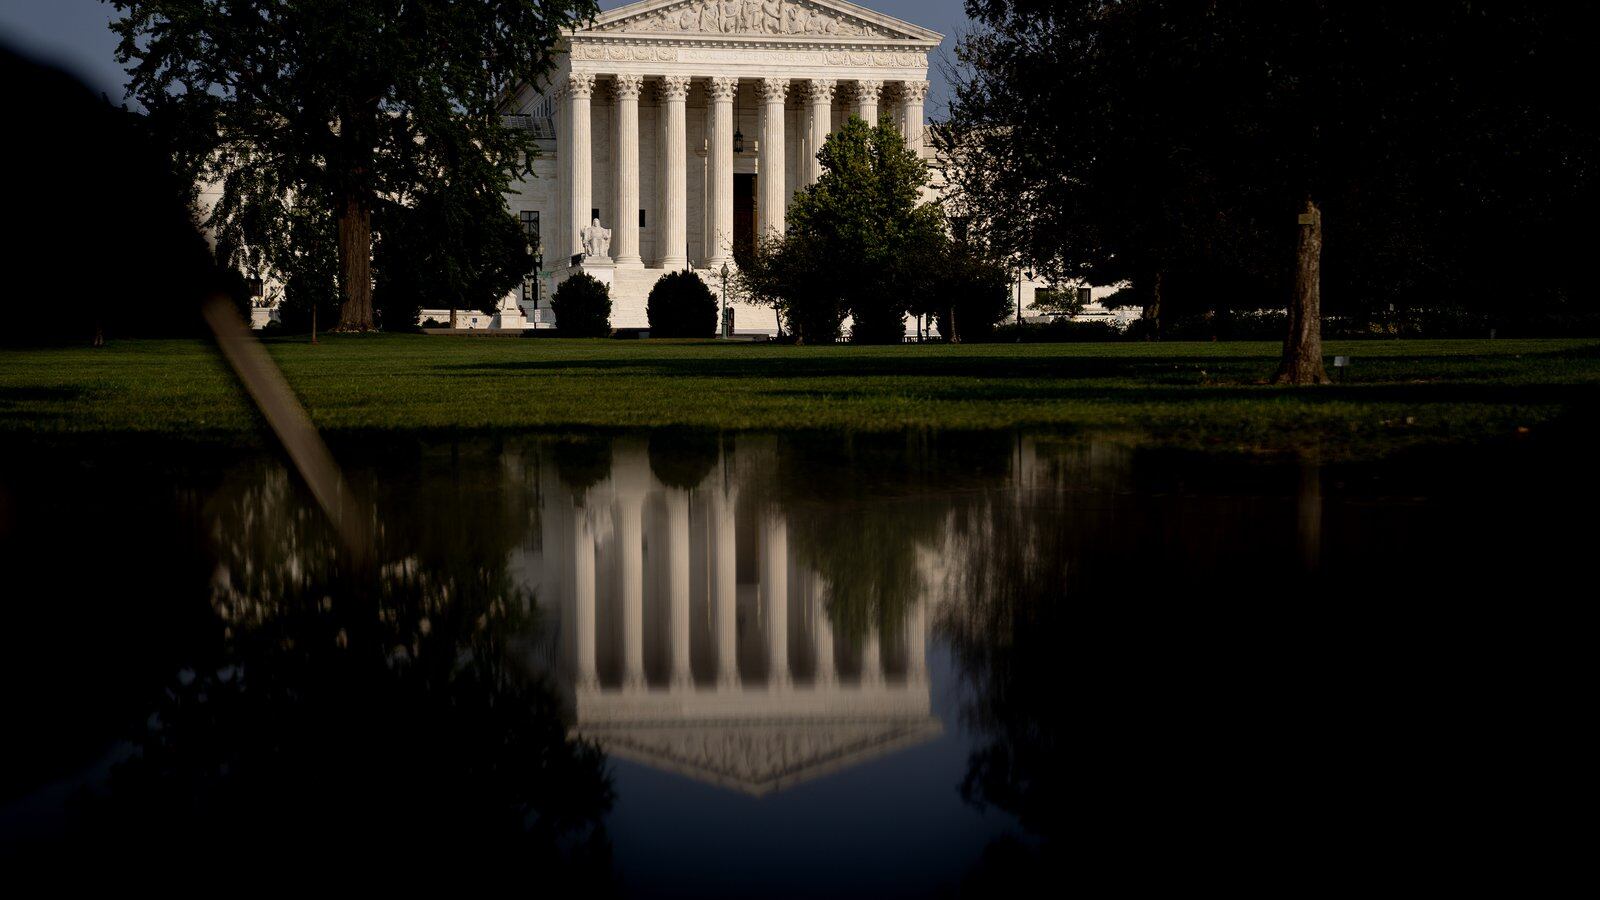 The United States Supreme Court building is reflected in a pool of water as it stands in the background of the image.